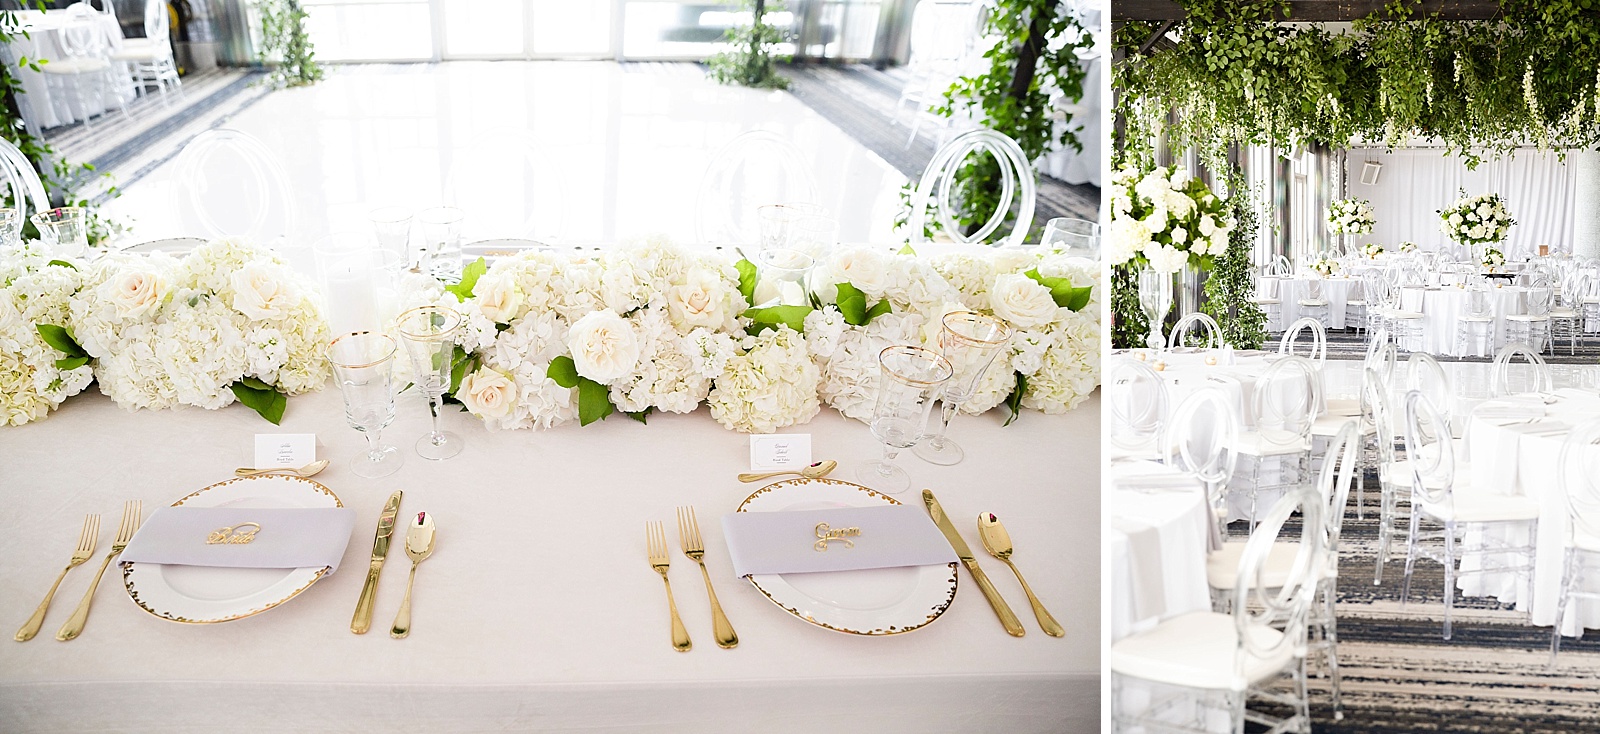 Ivory and Vine Event Co. designs florals for Blushington Blooms photographed by Randi Michelle Photography